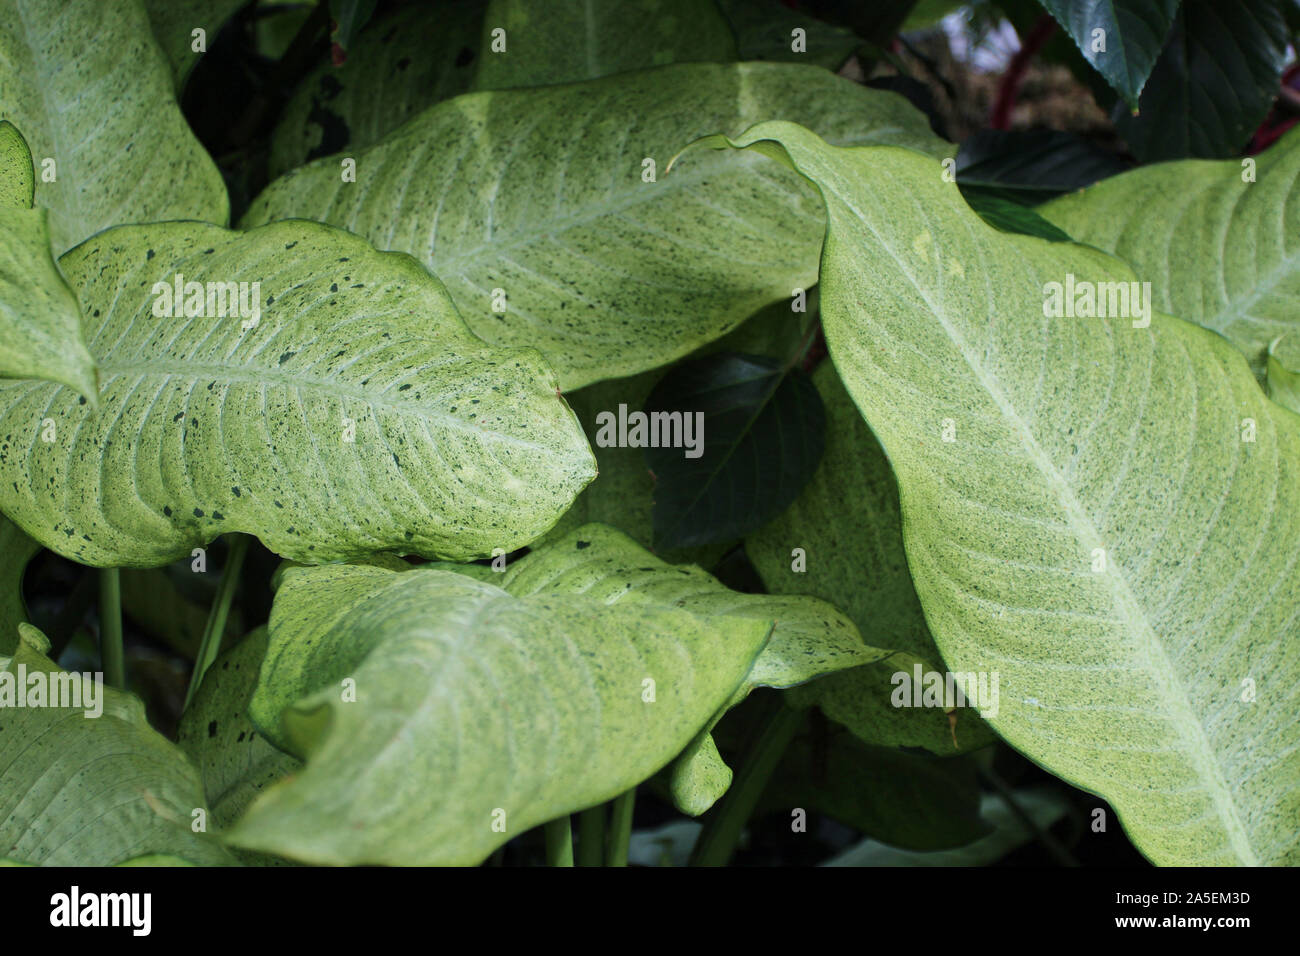 Close up of a cluster of Dumb cane, green speckled leaves Stock Photo